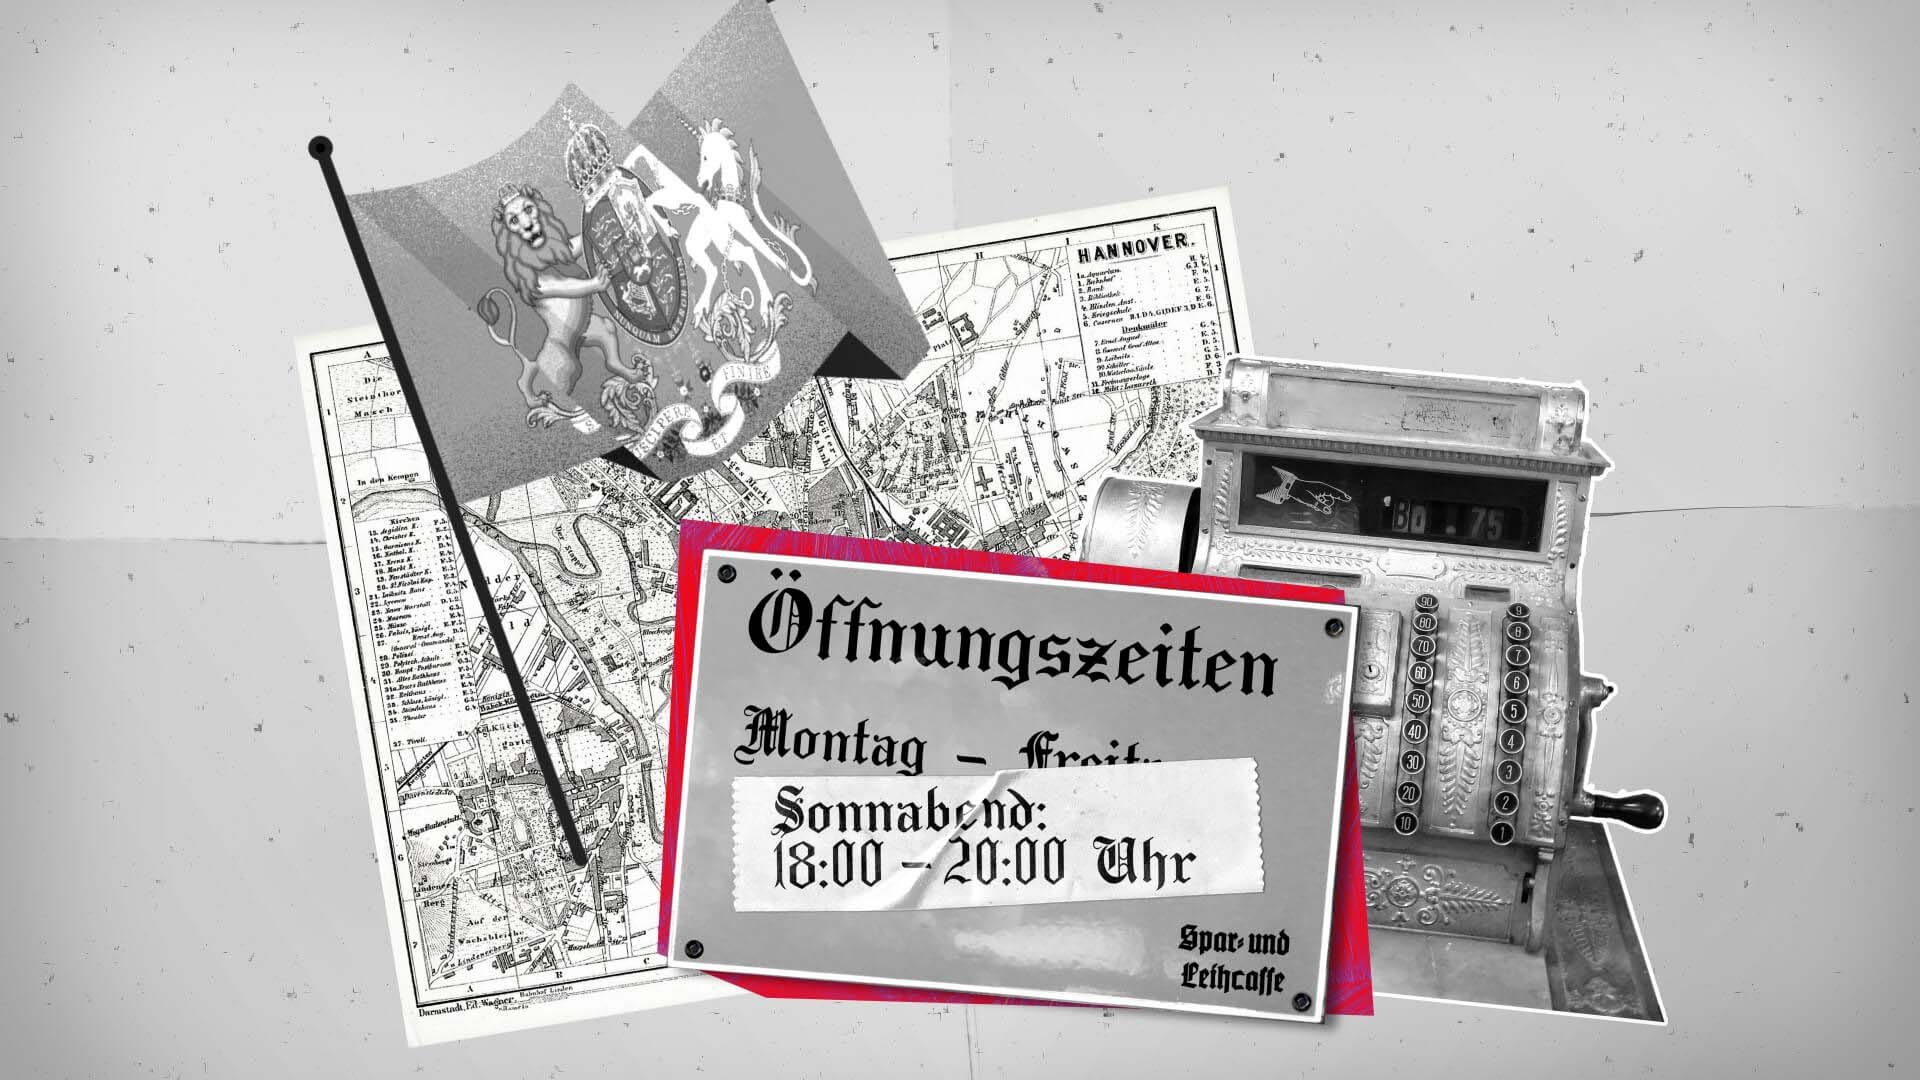 Thumbnail 200 Jahre Sparkasse Hannover Collage 1